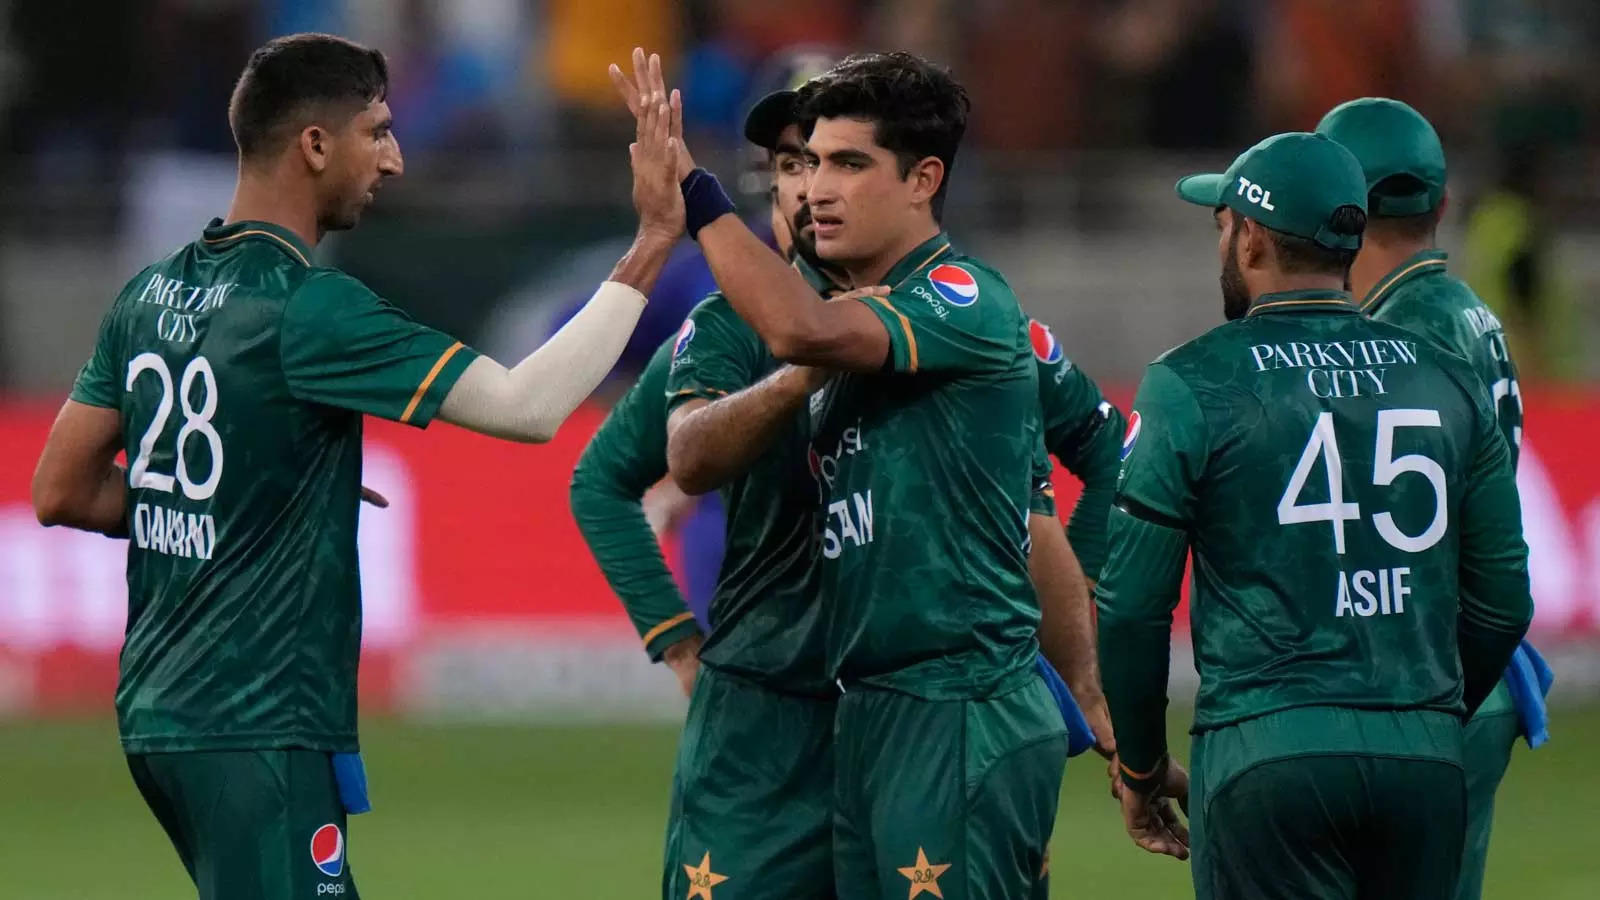 Pakistan were beaten by India in their first match